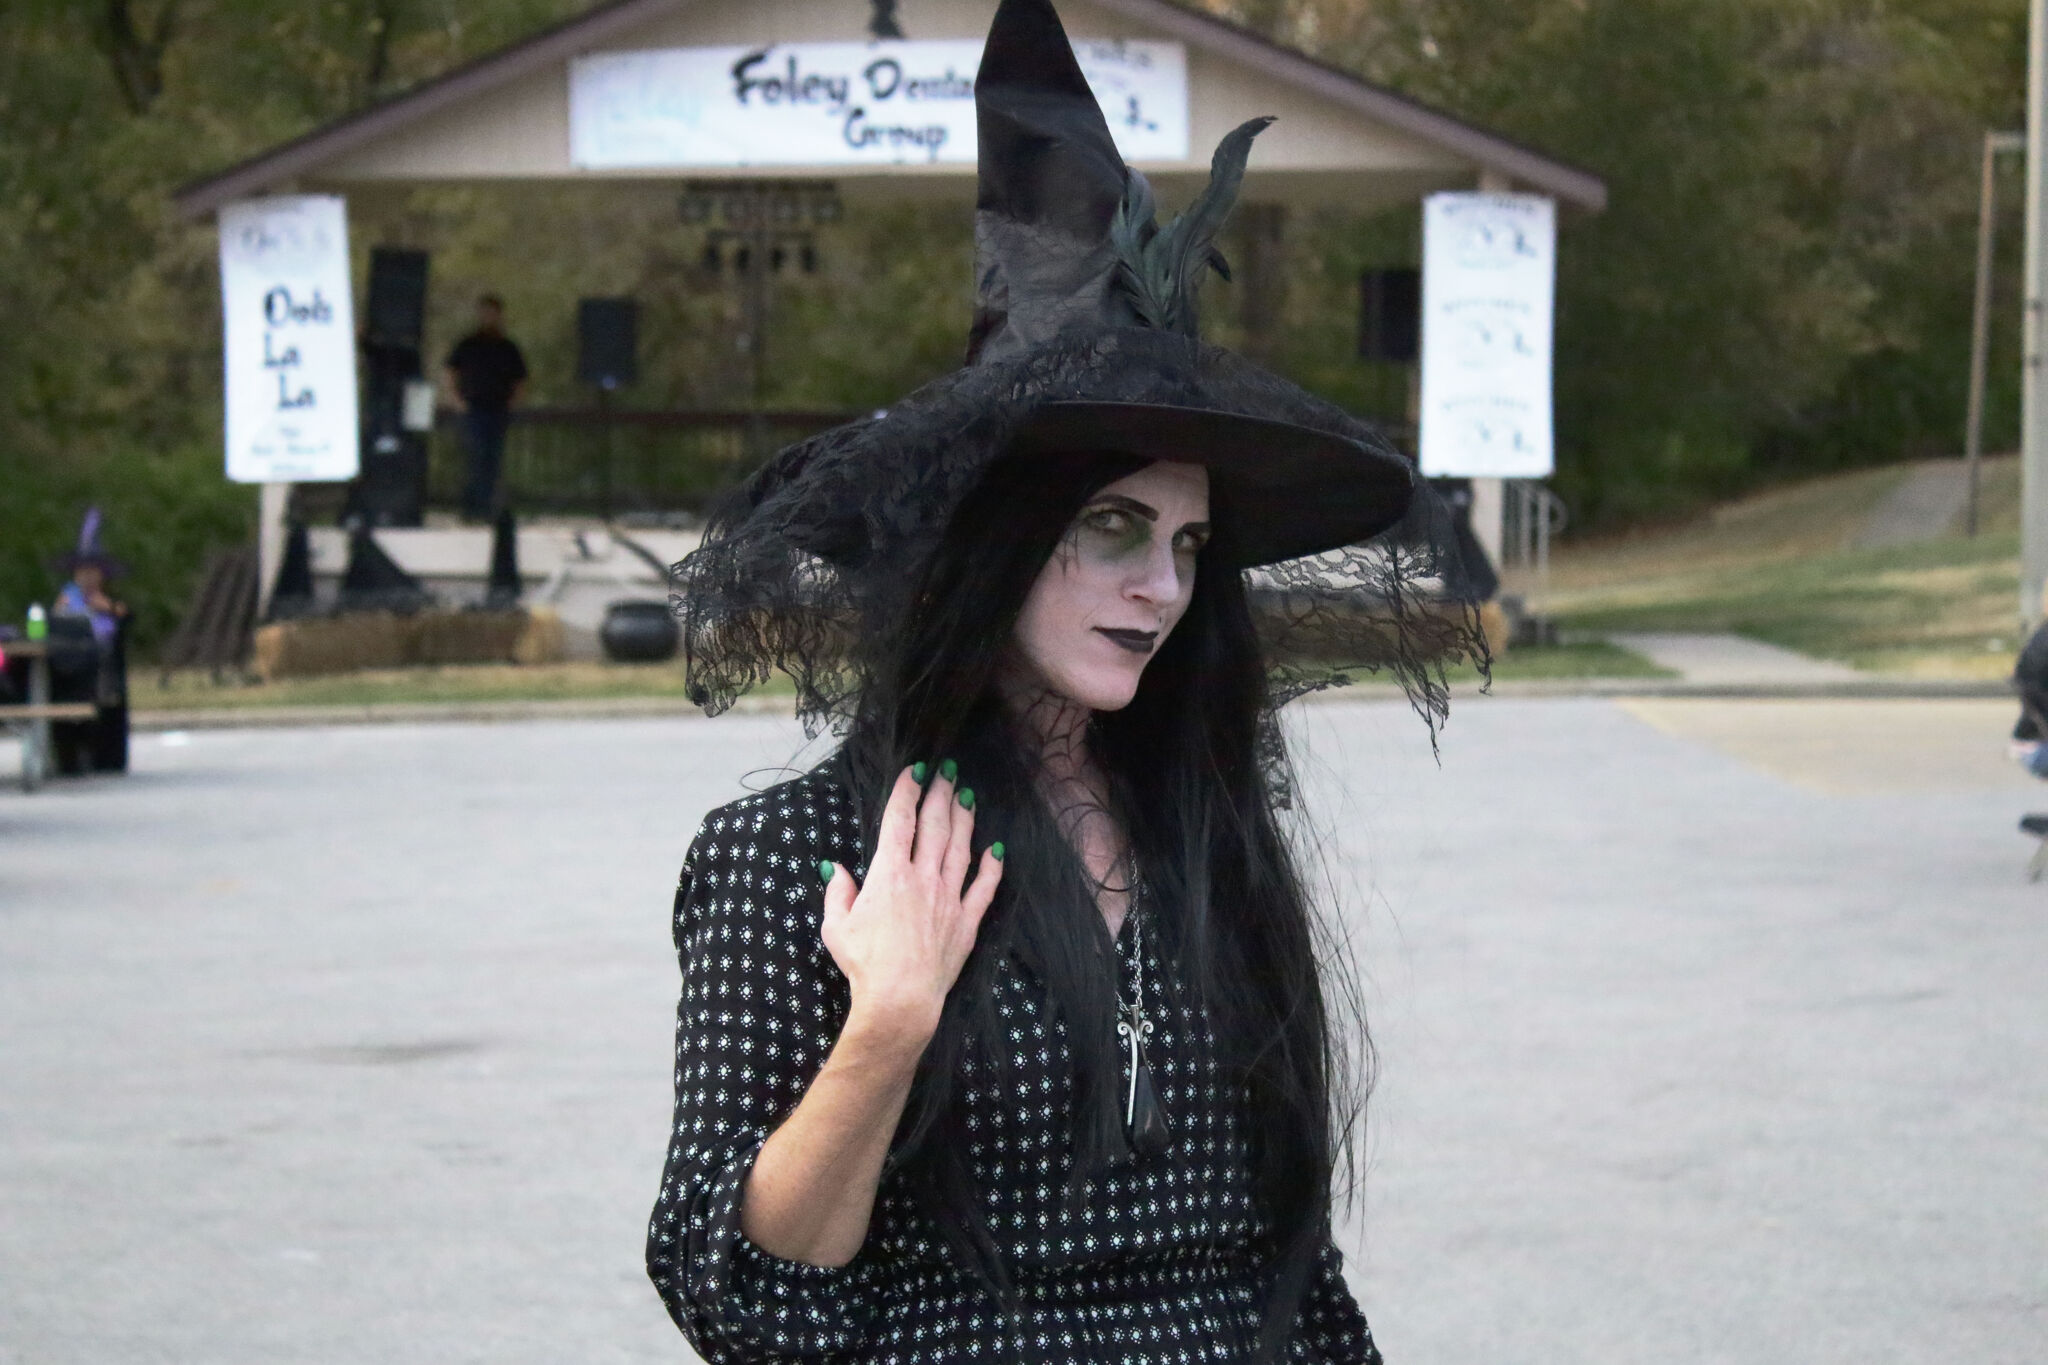 Witches Night Out brings crowd to Glen Carbon